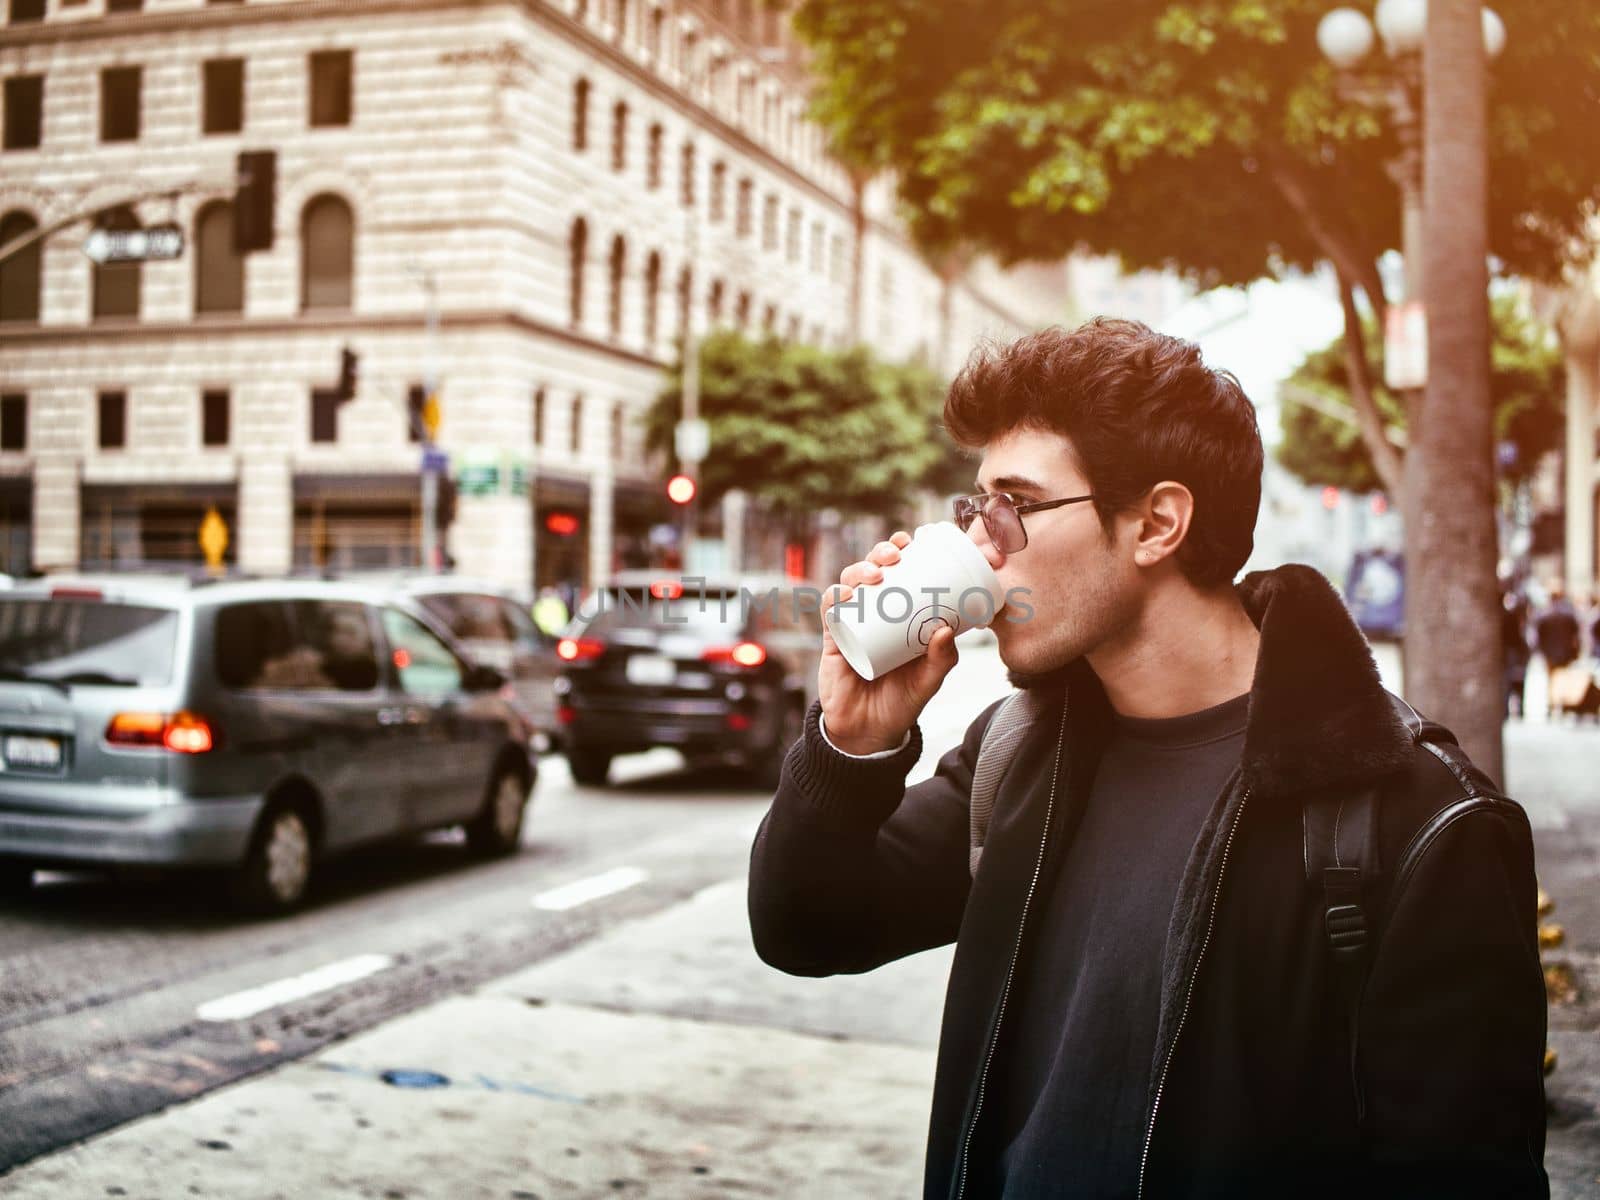 Attractive young man in modern city center drinking coffee from paper cup, wearing leather jacket